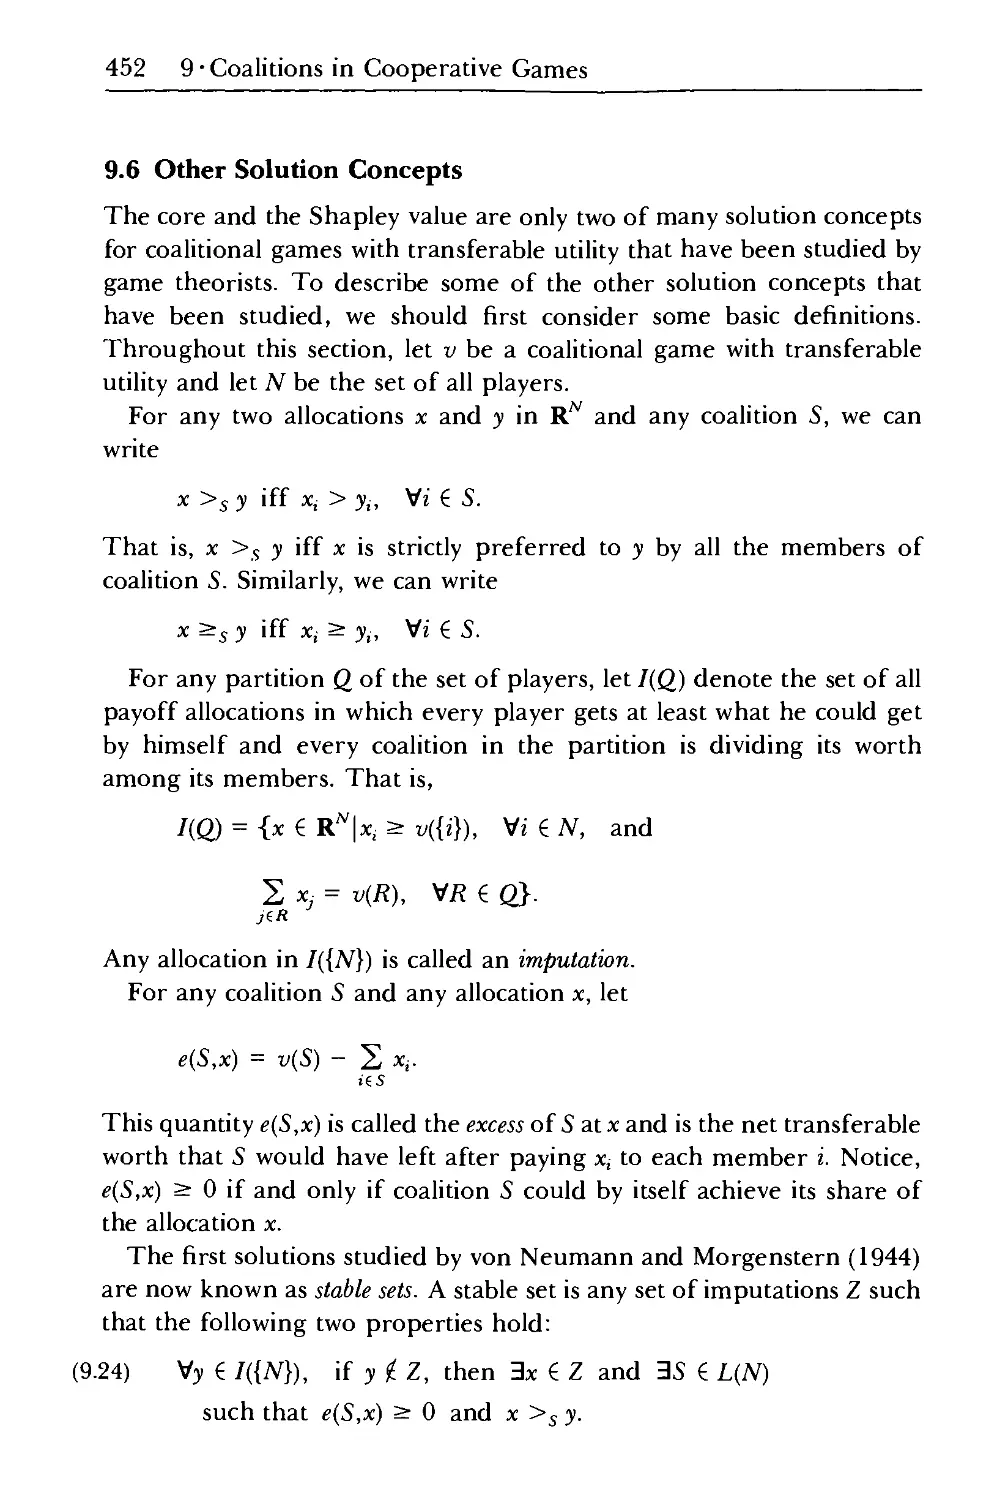 9.6 Other Solution Concepts